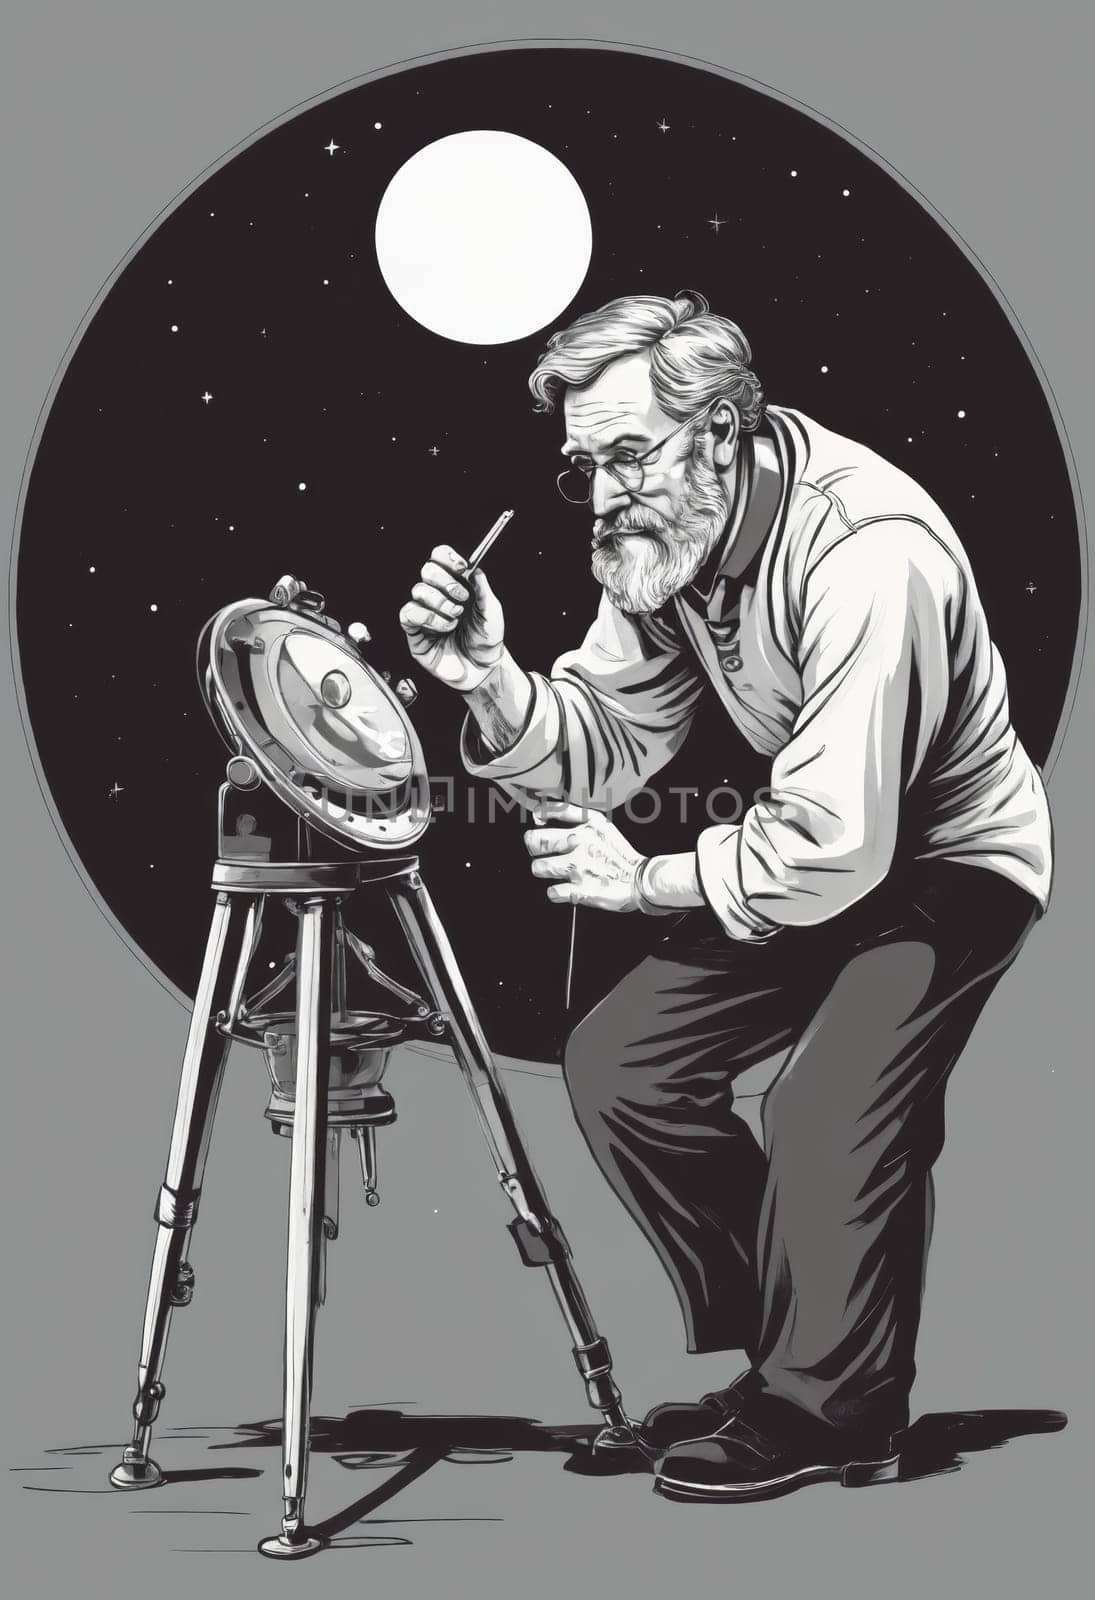 Under a celestial canopy, a stargazer in formal wear meticulously adjusts an old-fashioned telescope, linking past and present explorations.